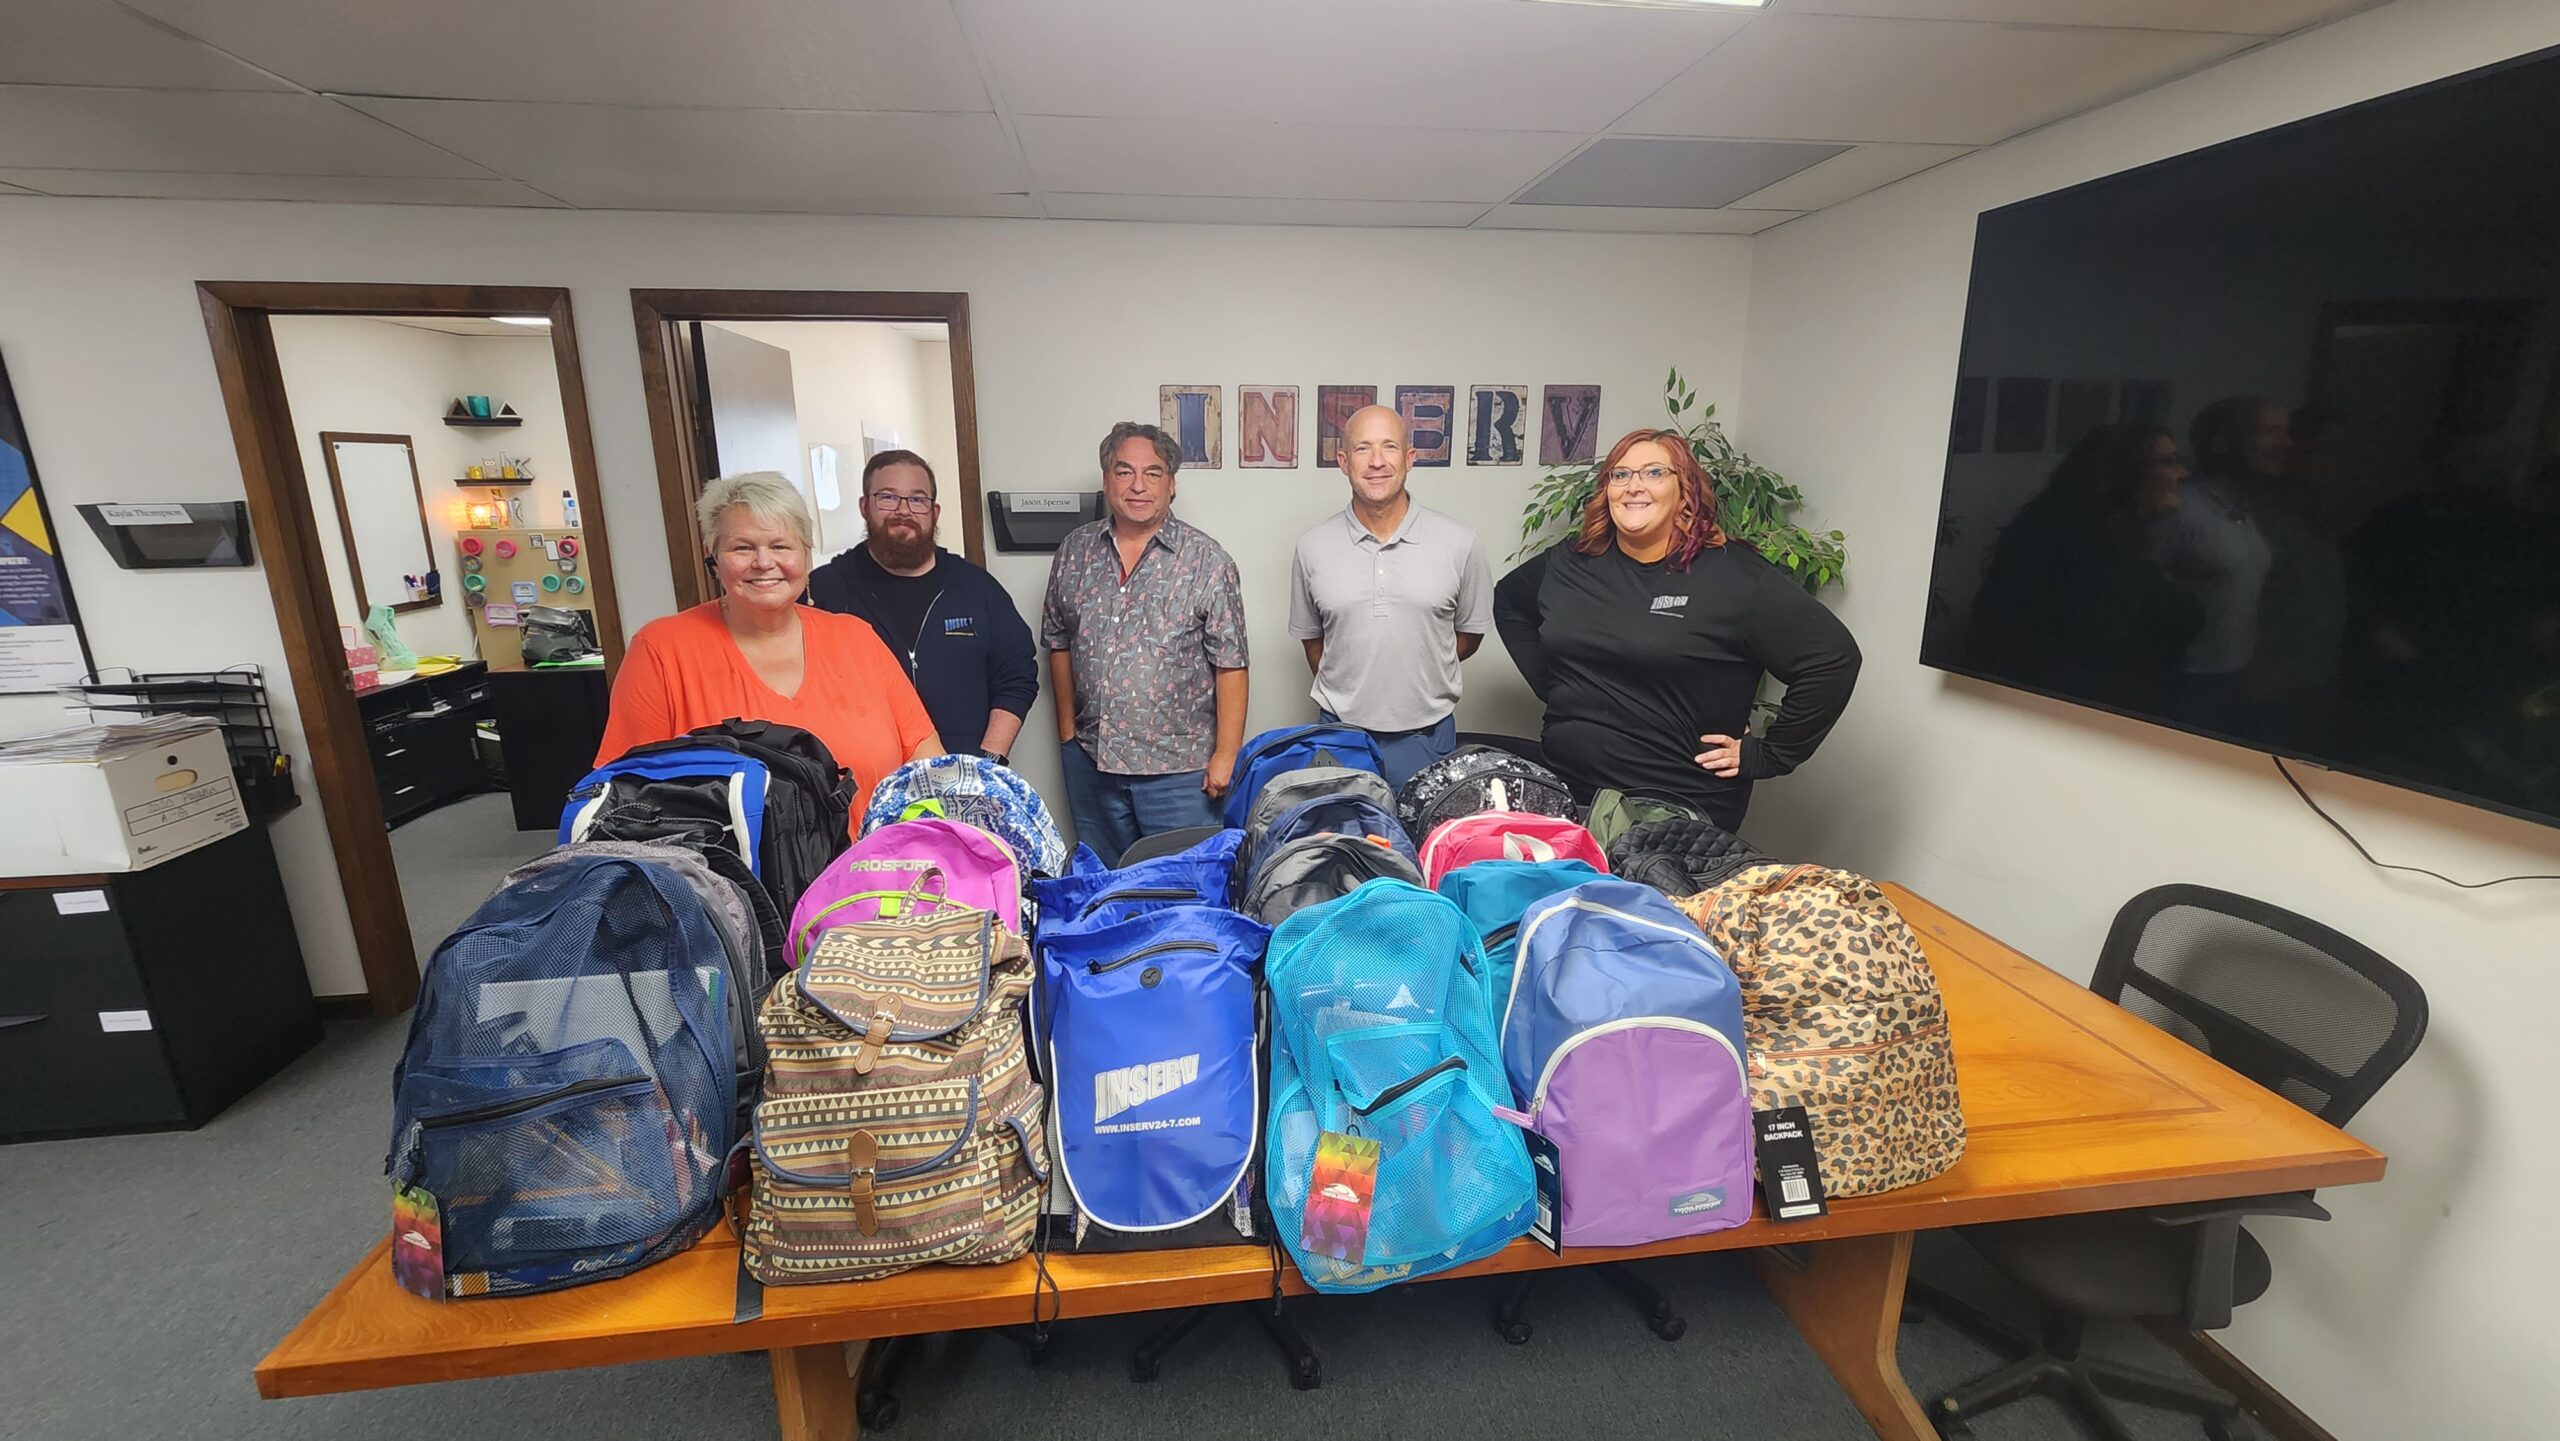 INSERV, Inc. Community Outreach Team standing behind a table with backpacks put together with school supplies